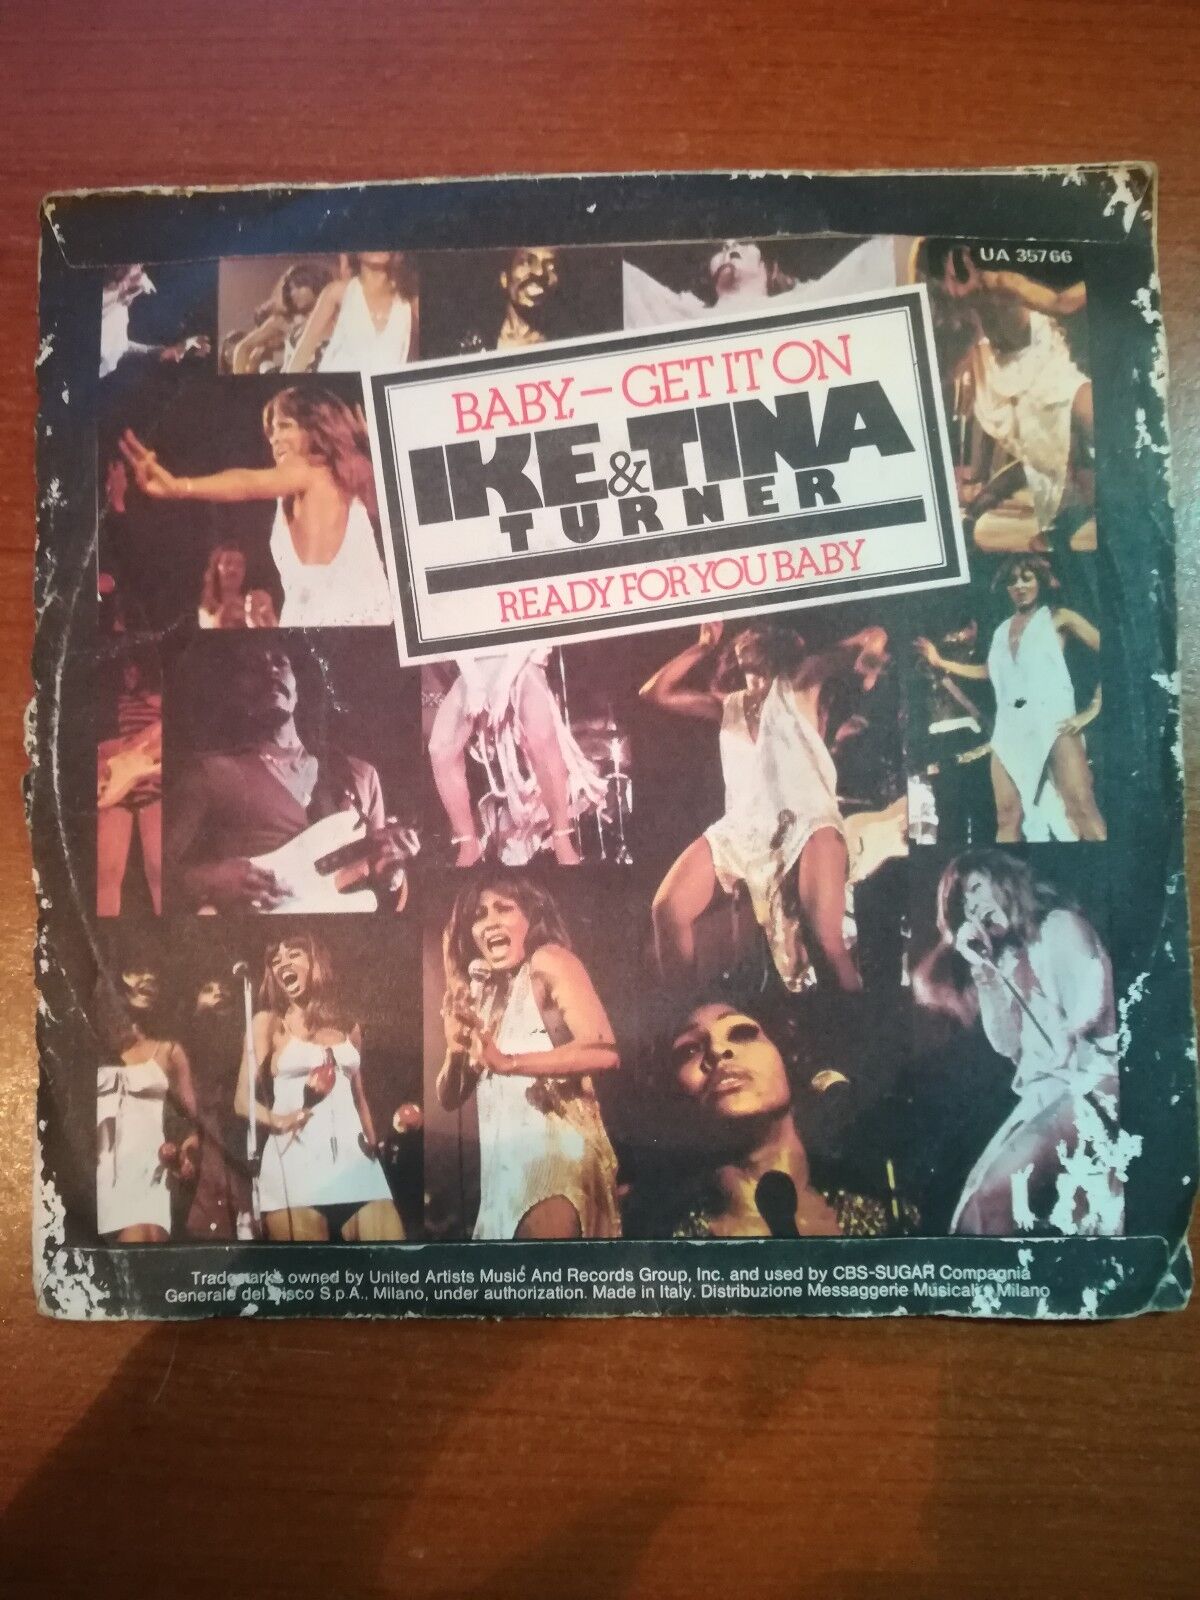 Ready for you baby - Ike & tina Turner - 1975 - M